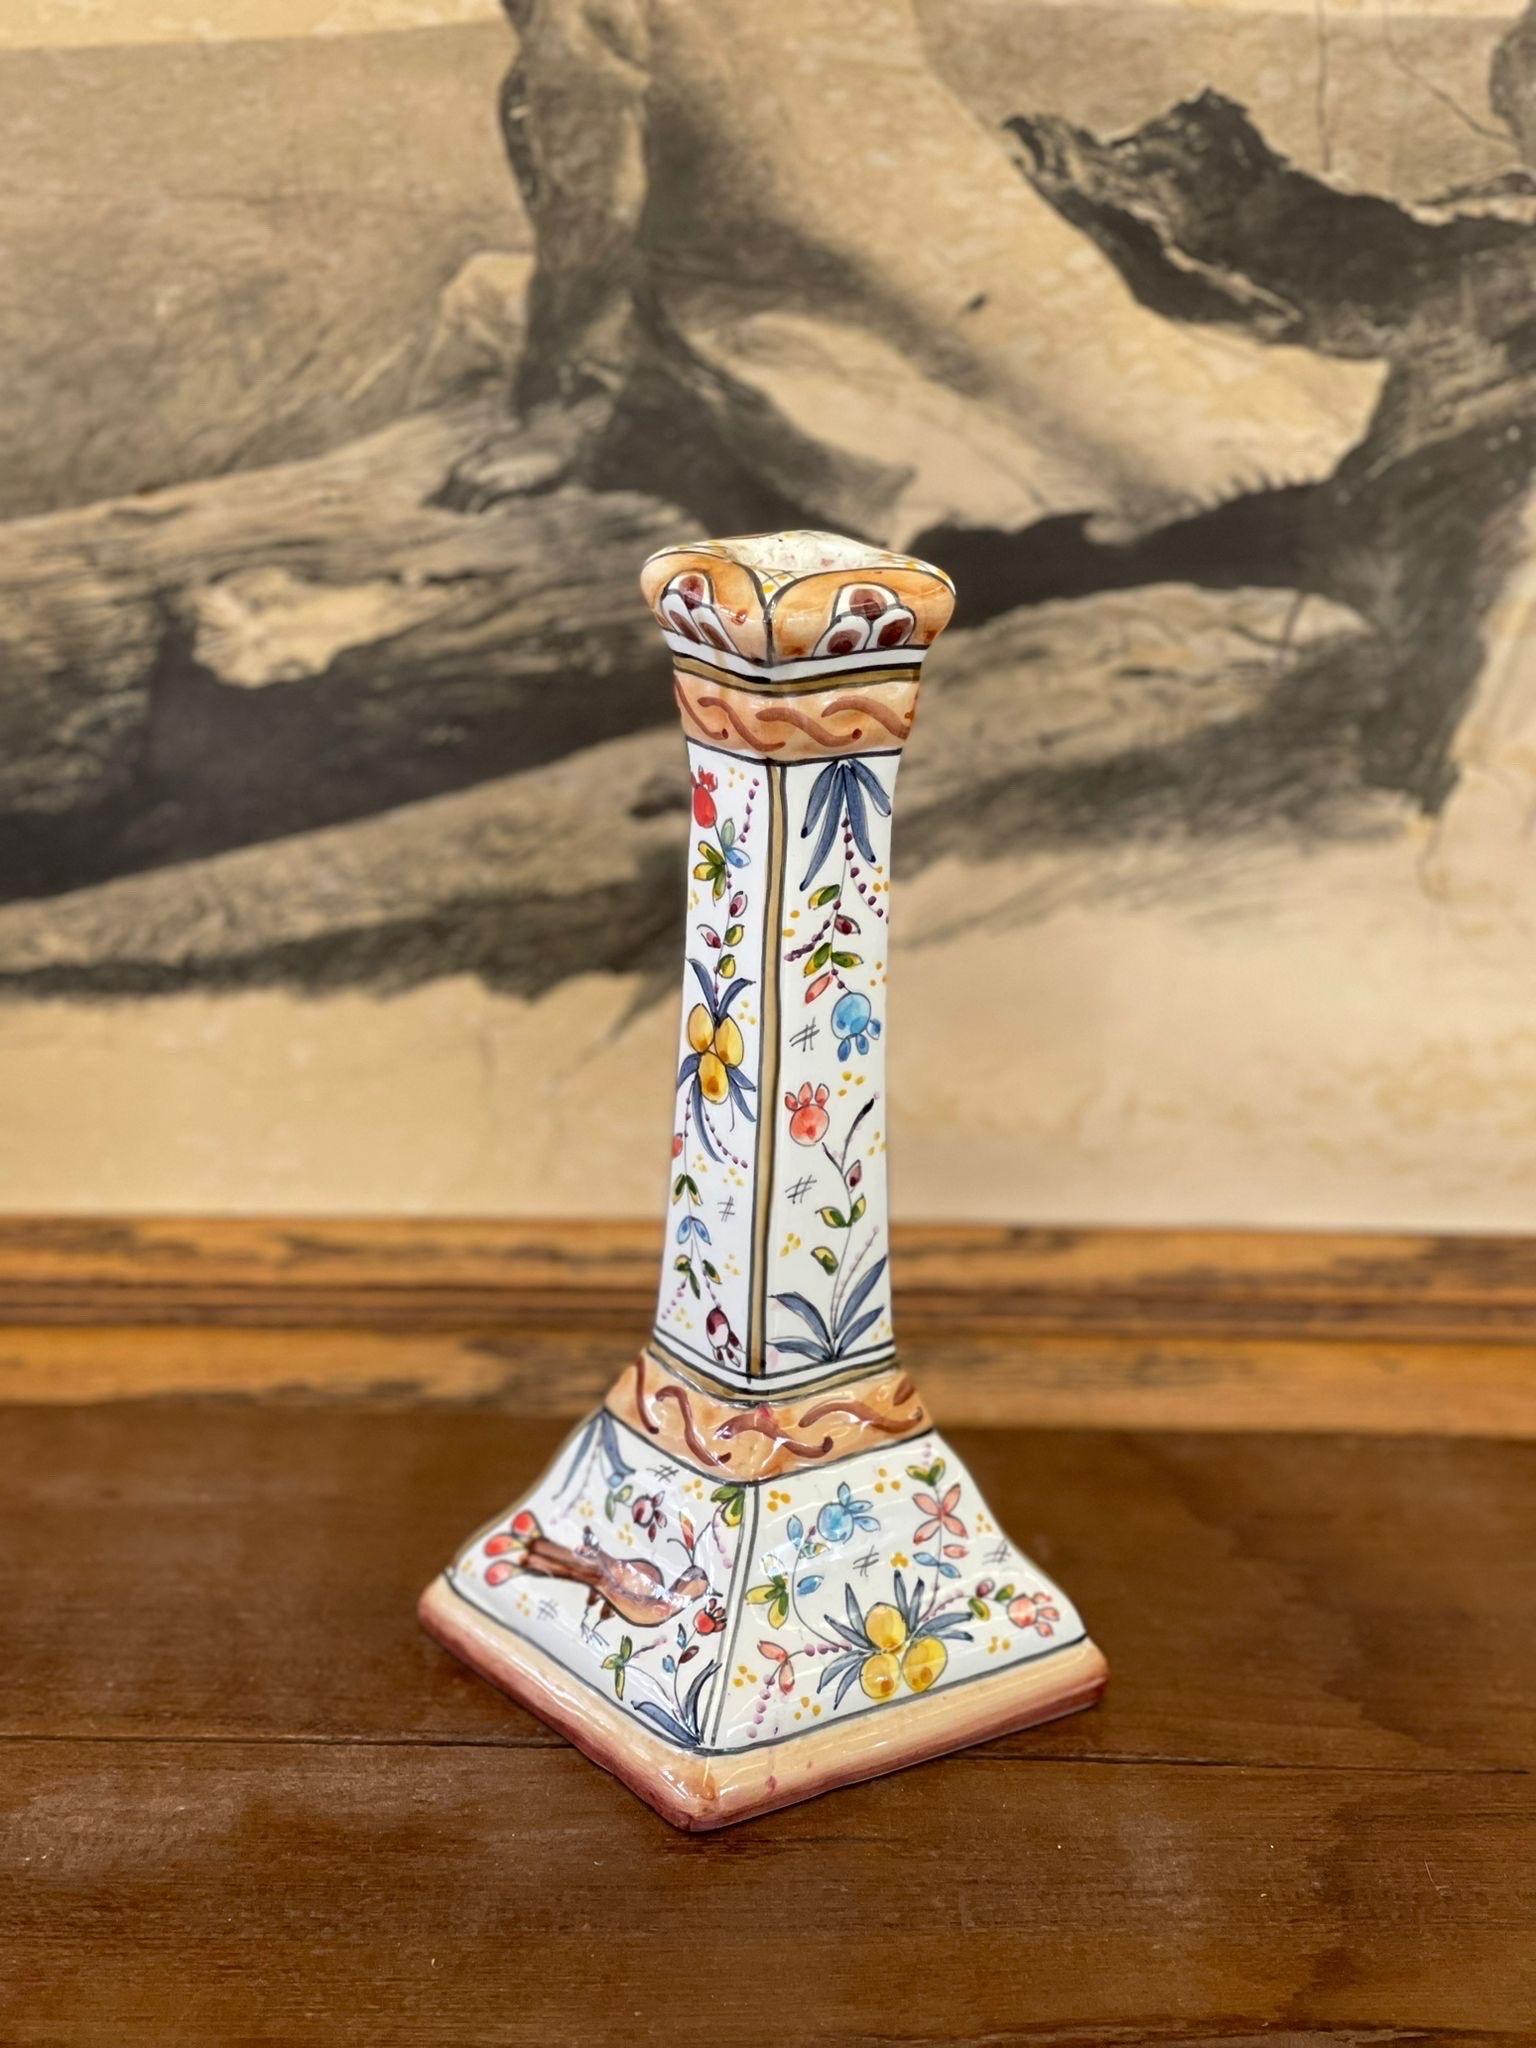 Hand Painted Portuguese Candle Holder.

Dimensions. 4 1/2 W ; 4 1/2 D ; 9 1/2 H.